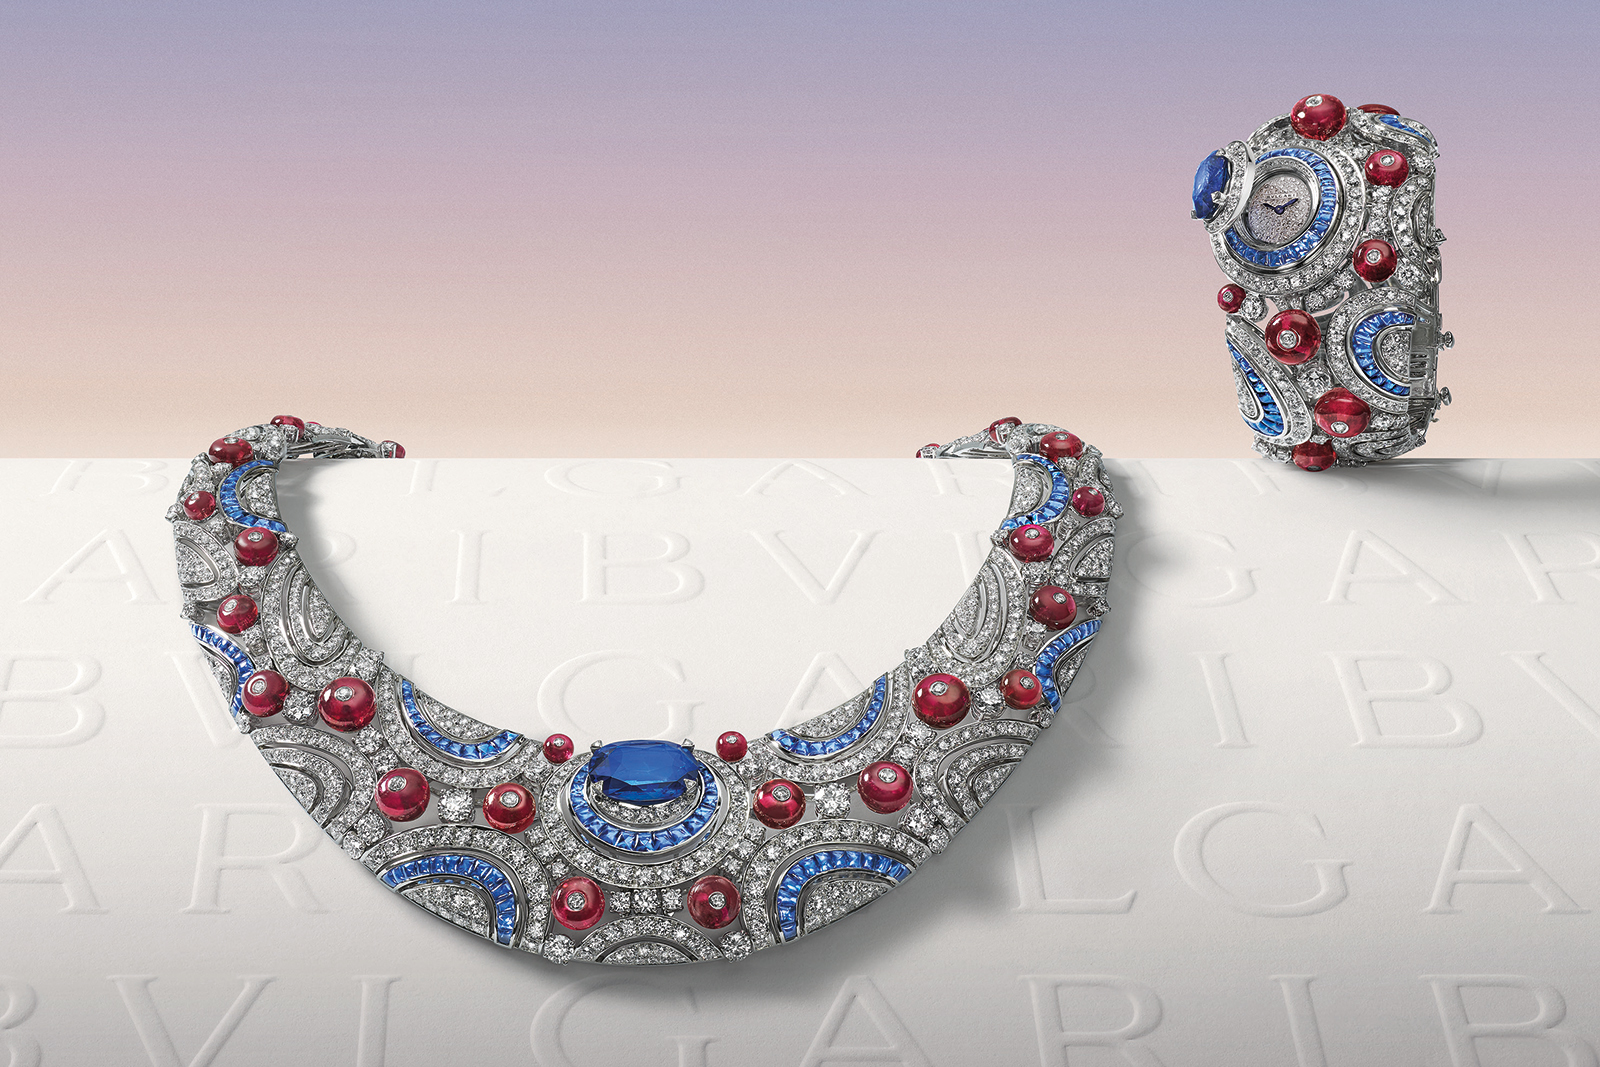 Bulgari Celestial Sky High Jewellery secret watch and a necklace from the MAGNIFICA collection